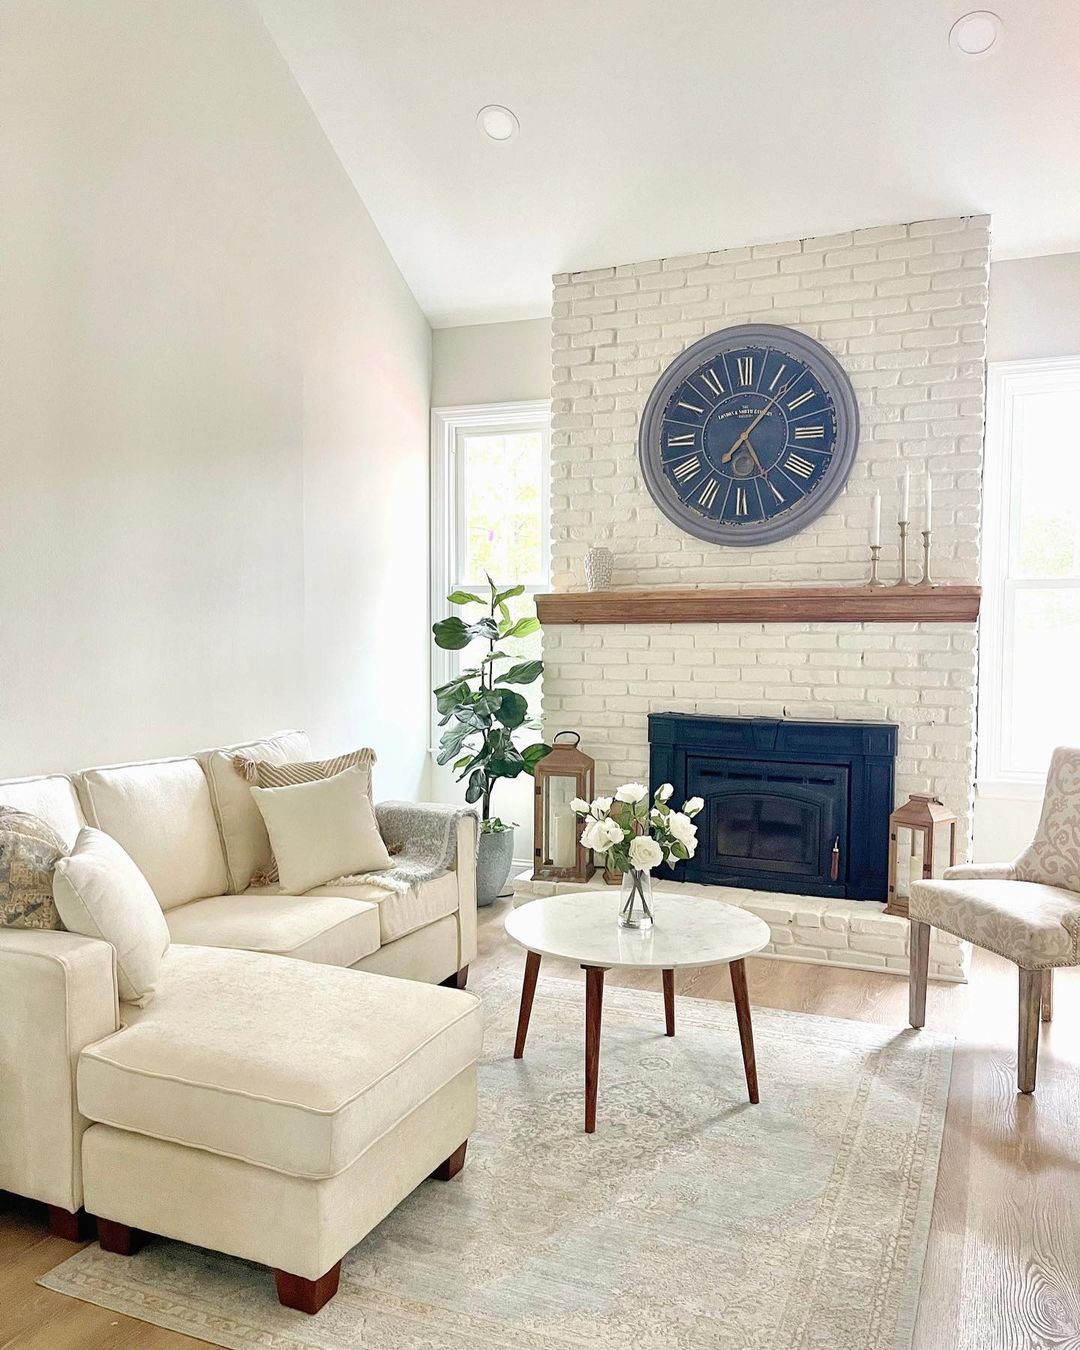 Clean and Contemporary: White Brick Fireplace with Oversized Clock